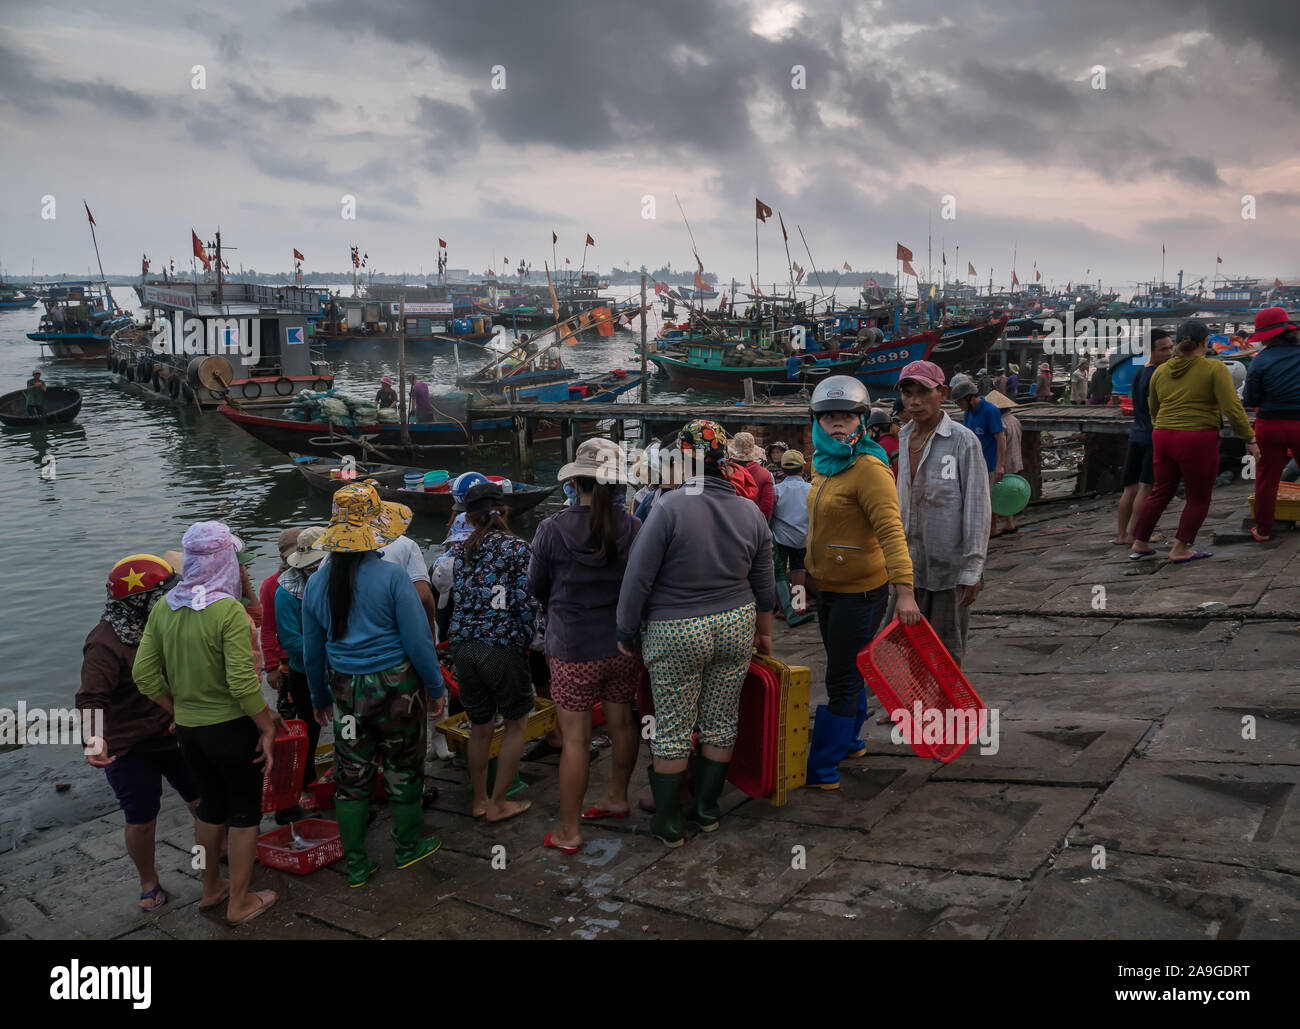 Crowd of fishermen, traders and salesmen bargaining about and dealing with fresh fish at Cua Dai Beach, Hoi An main fish market, Vietnam, Asia Stock Photo